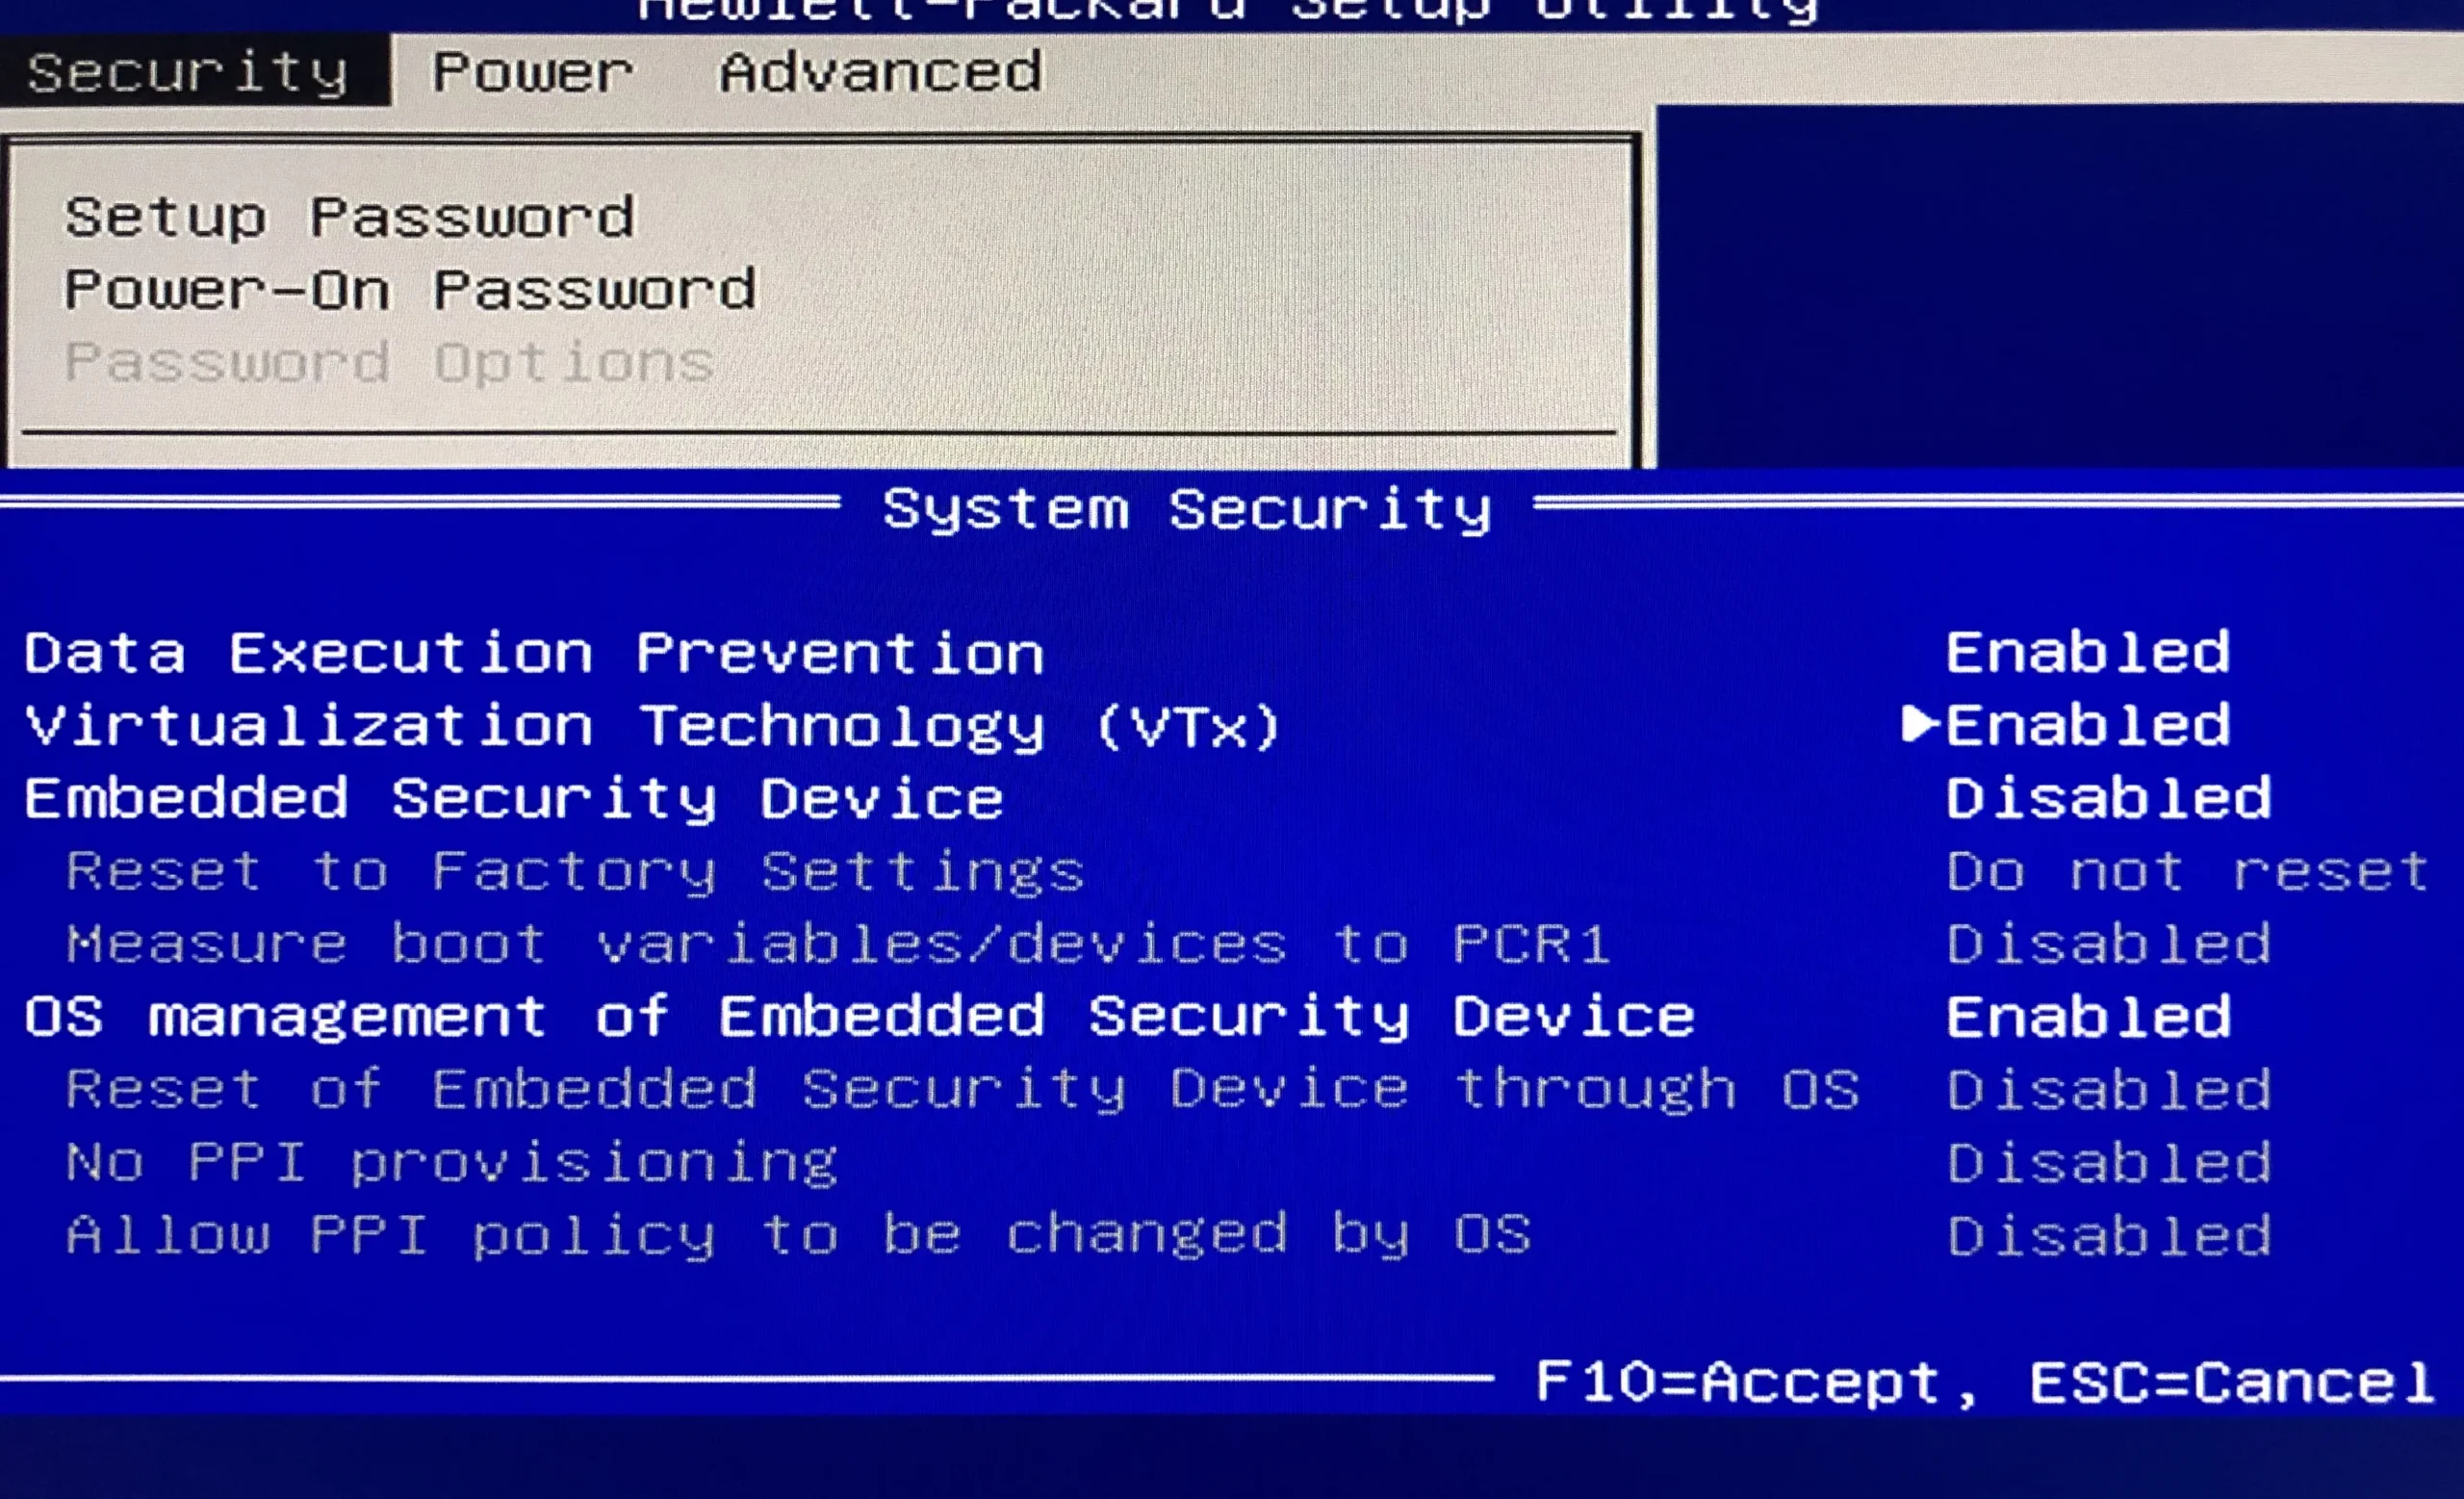 hewlett-packard hp prodesk 600 g1 sff bios - How do I get into the BIOS on a HP ProDesk 600 G1